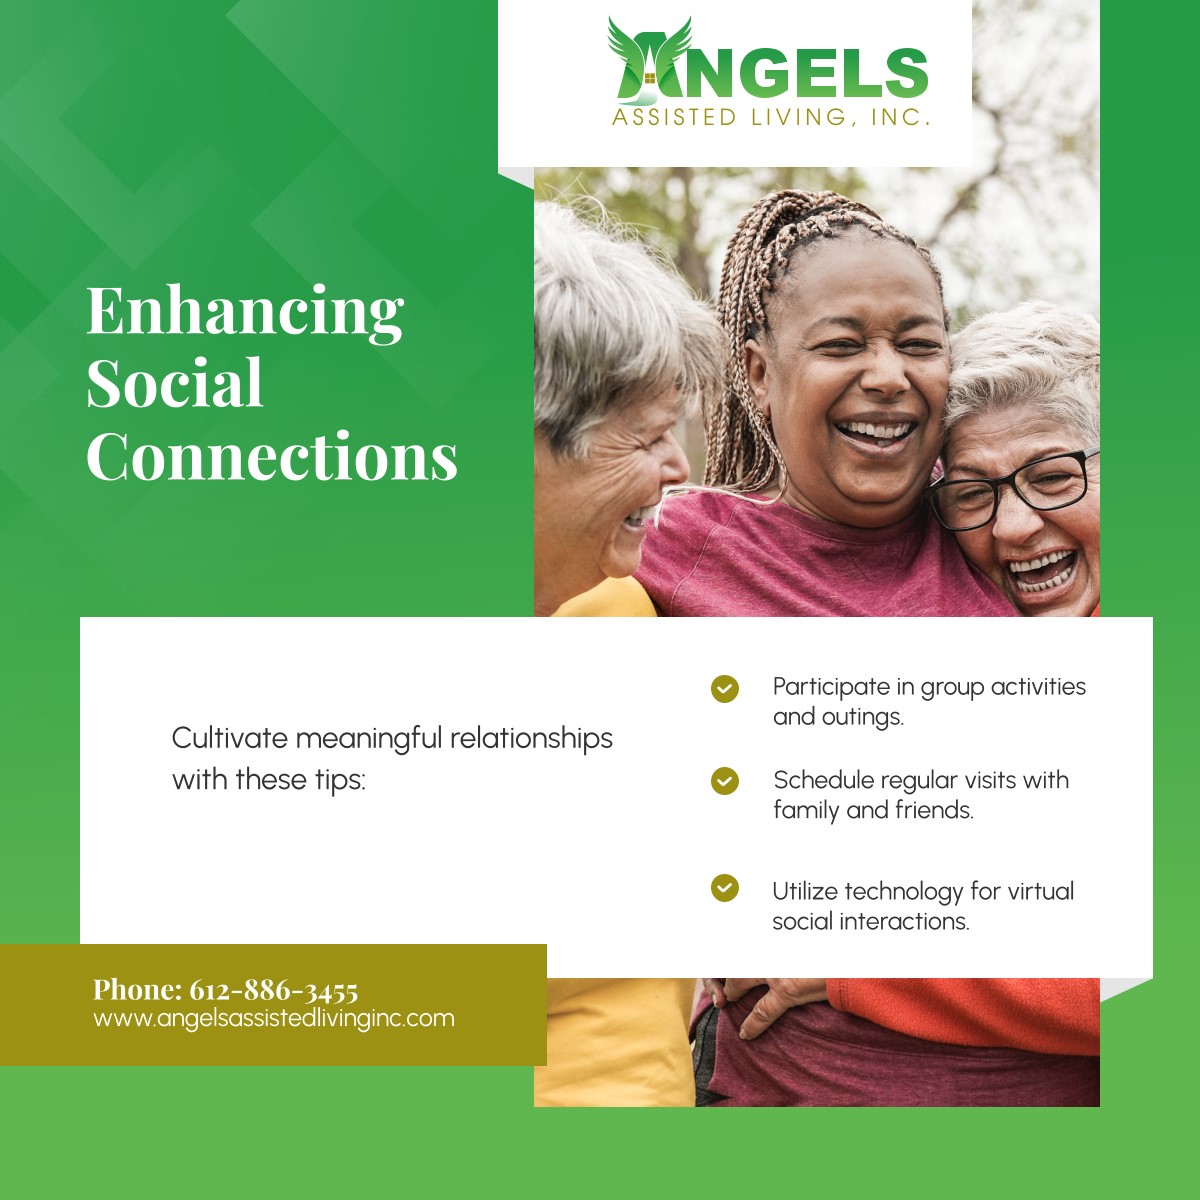 Social connections are vital for emotional well-being. Try these tips to foster meaningful relationships and combat loneliness. 

#SocialConnections #MinneapolisMN #AssistedLivingHome